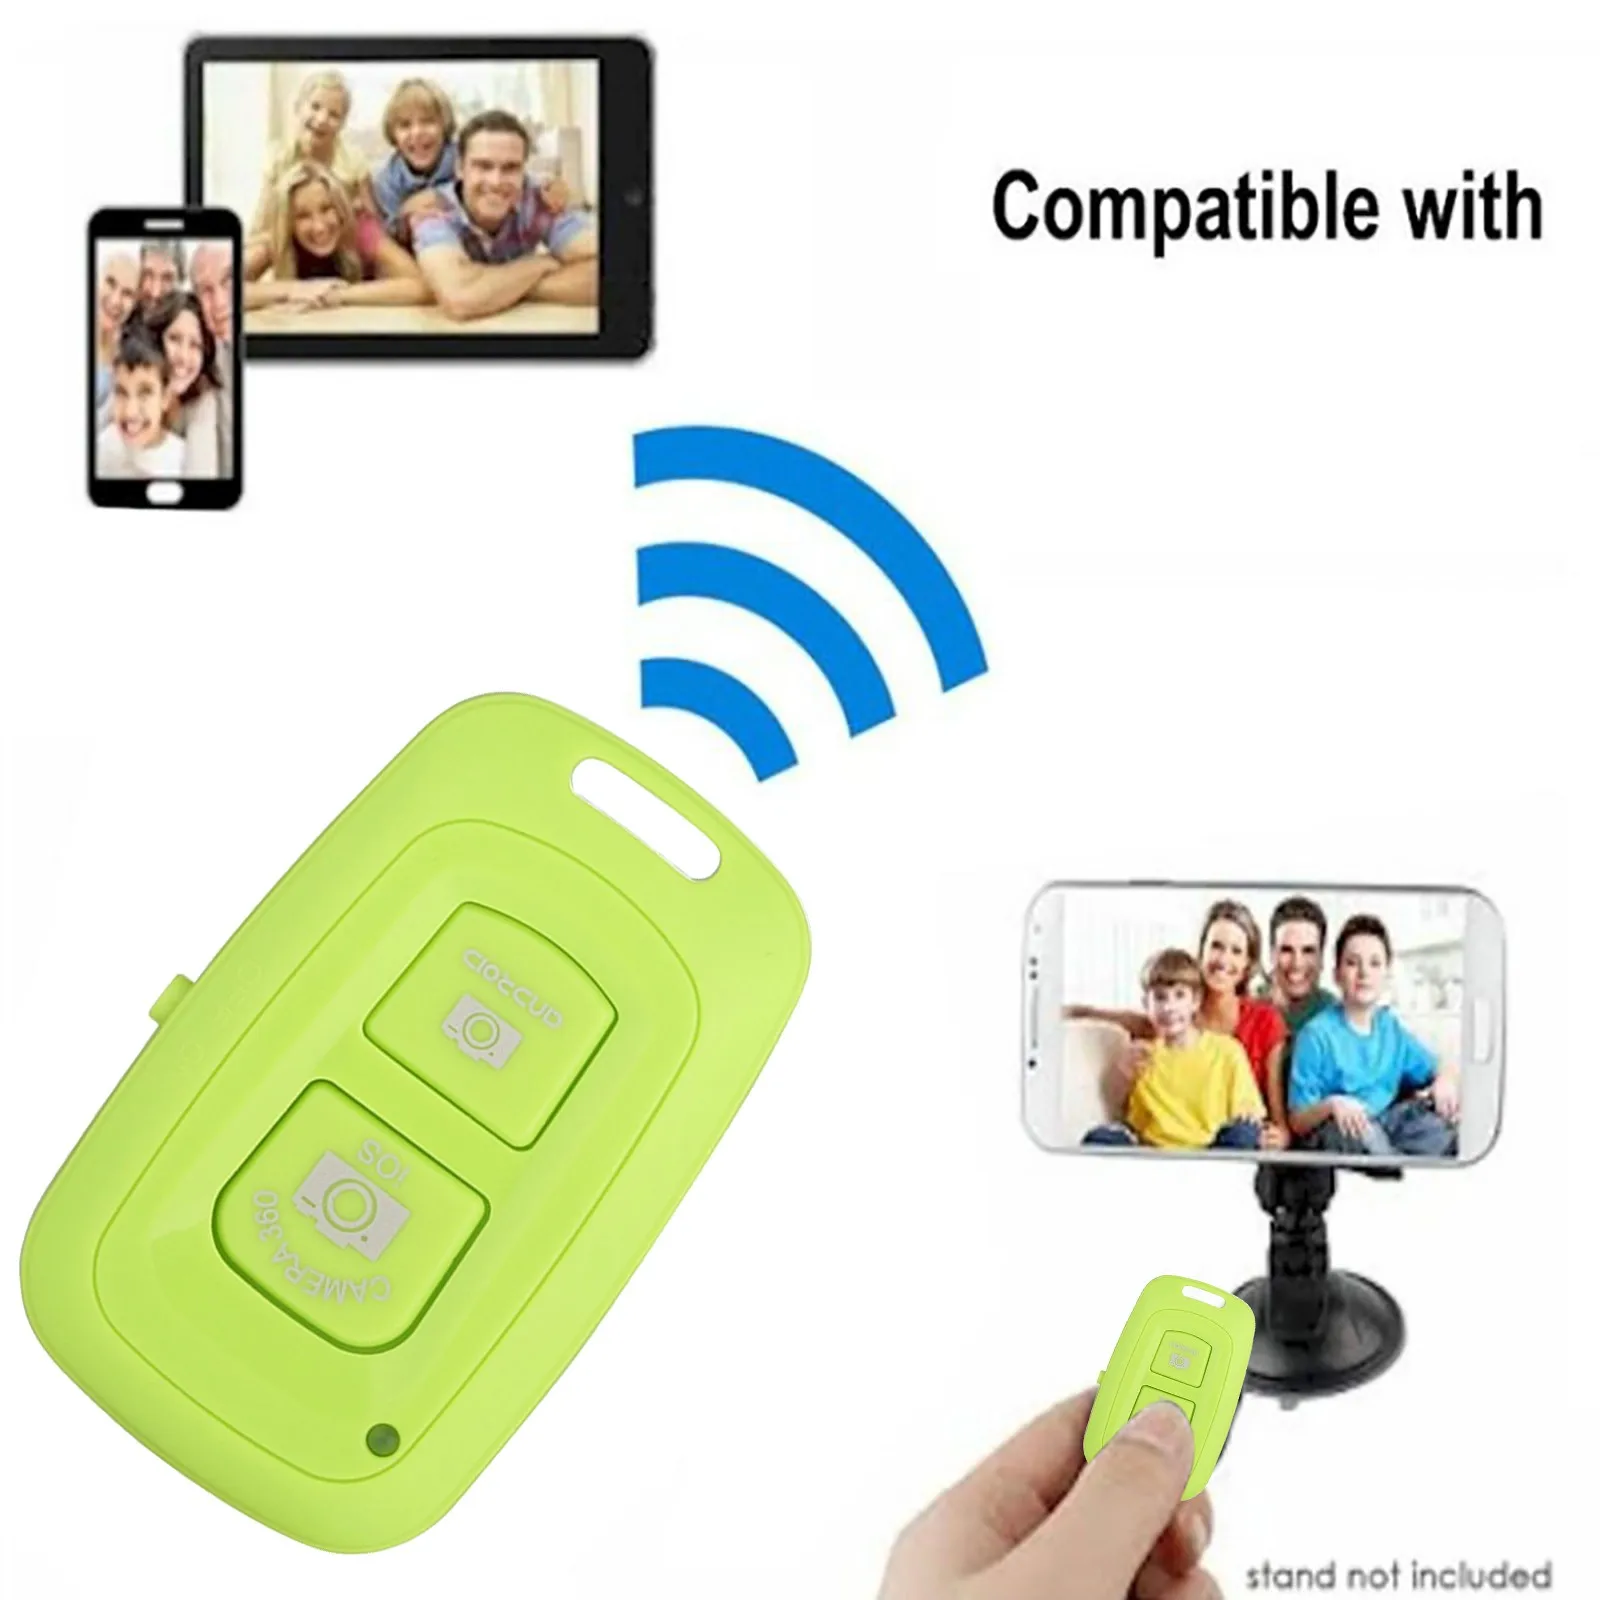 Bluetooth-compatible Remote Control Button Wireless Controller Self-Timer Camera Stick Shutter Release Monopod Selfie for ios images - 6